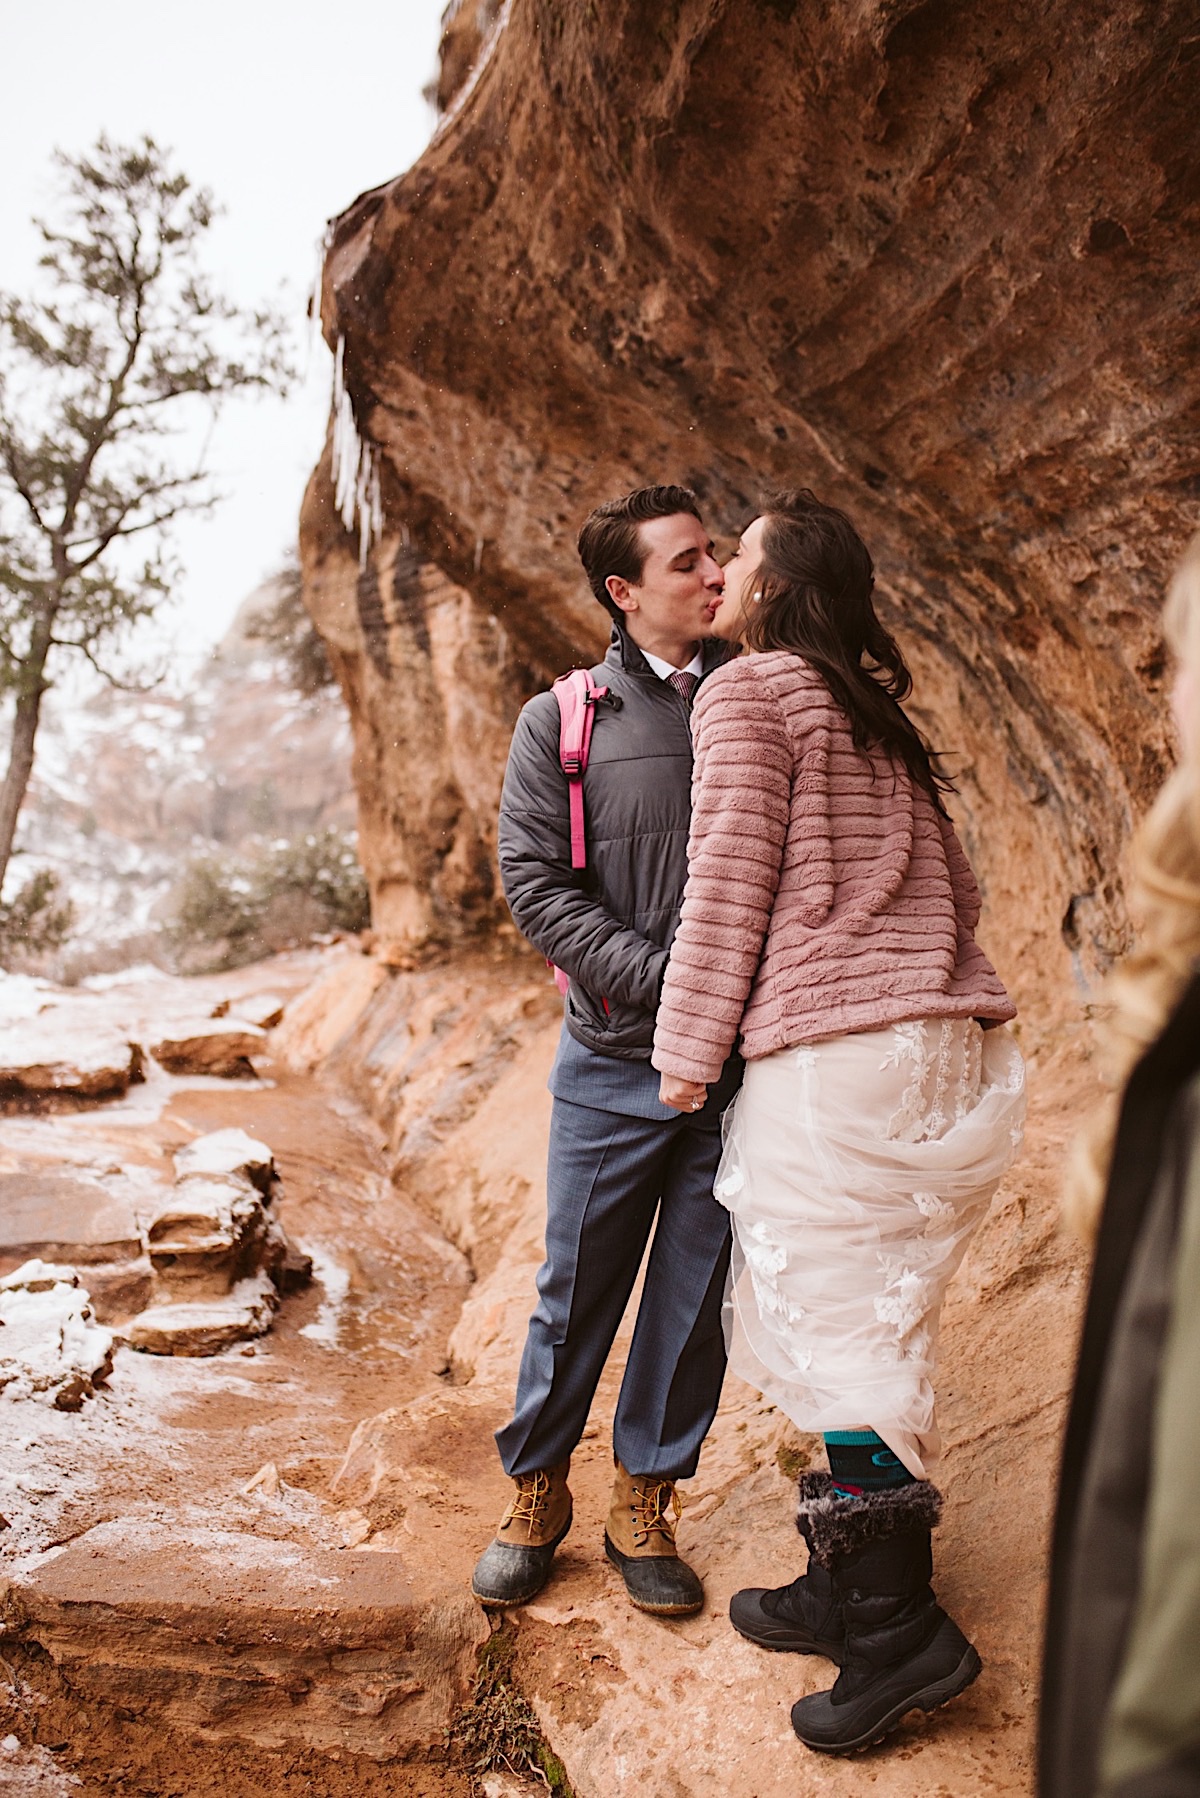 Bride and groom, wearing hiking boots, stop for a kiss next to rock cliffs.